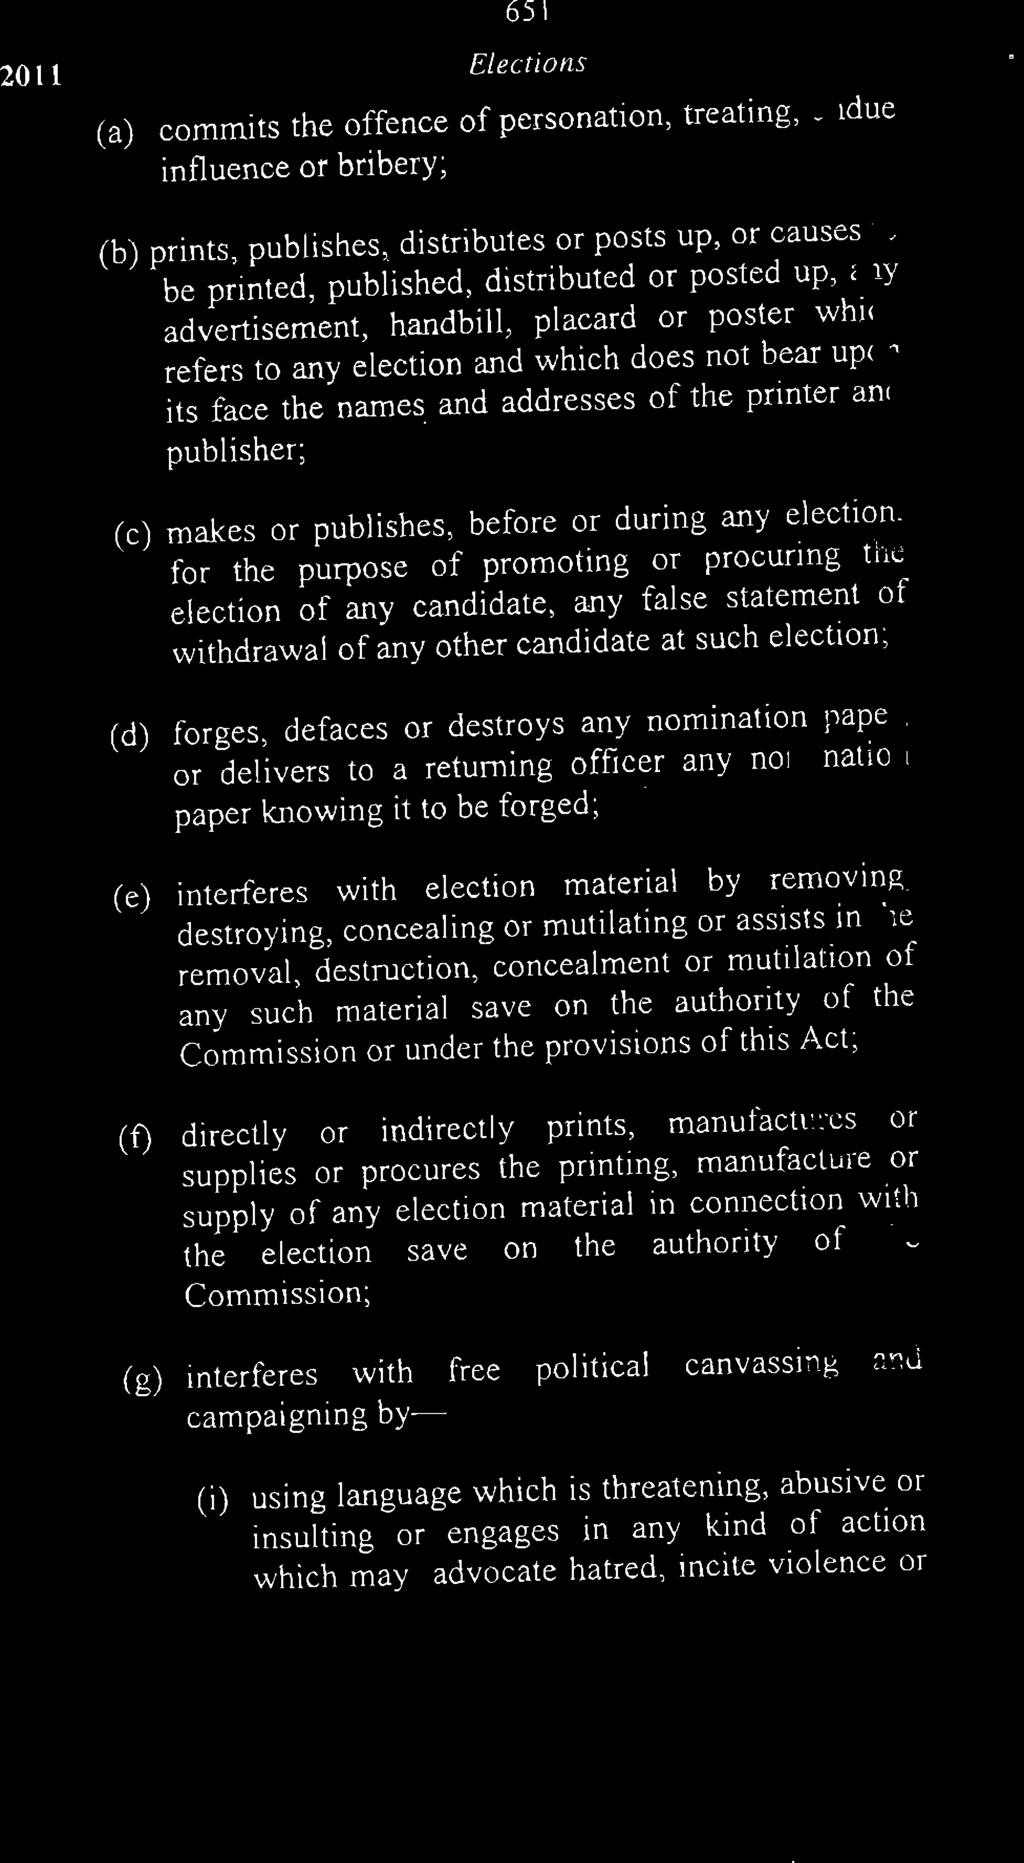 2011 651 Elections (a) commits the offence of personation, treating, undue influence or bribery; (b) (c) prints, publishes,, distributes or posts up, or causes to be printed, published, distributed